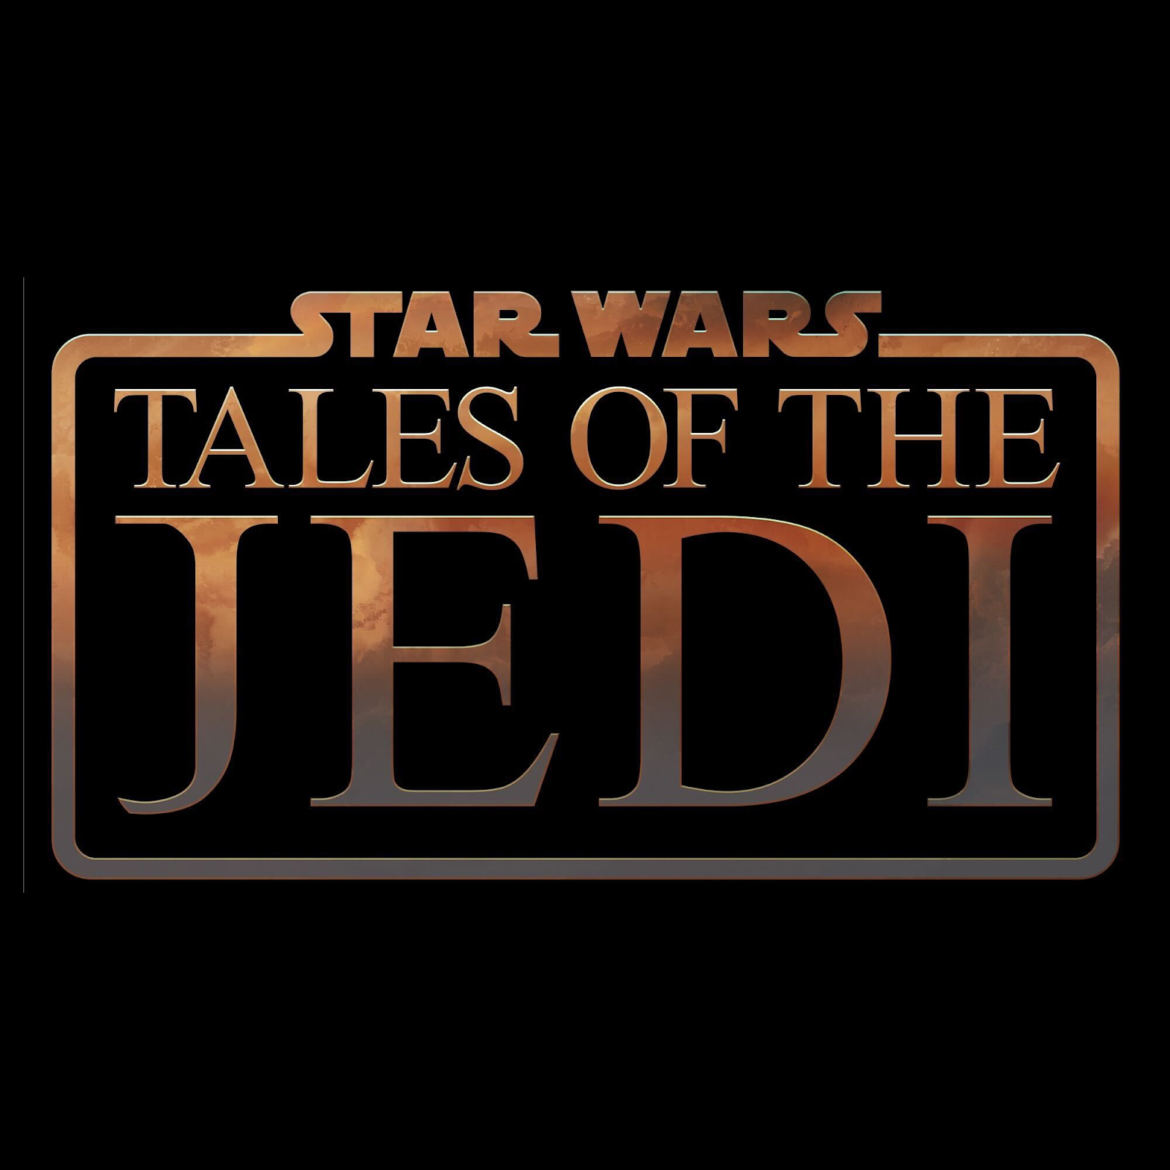 “Tales of the Galaxy” – A Star Wars Anthology Series [PITCH]